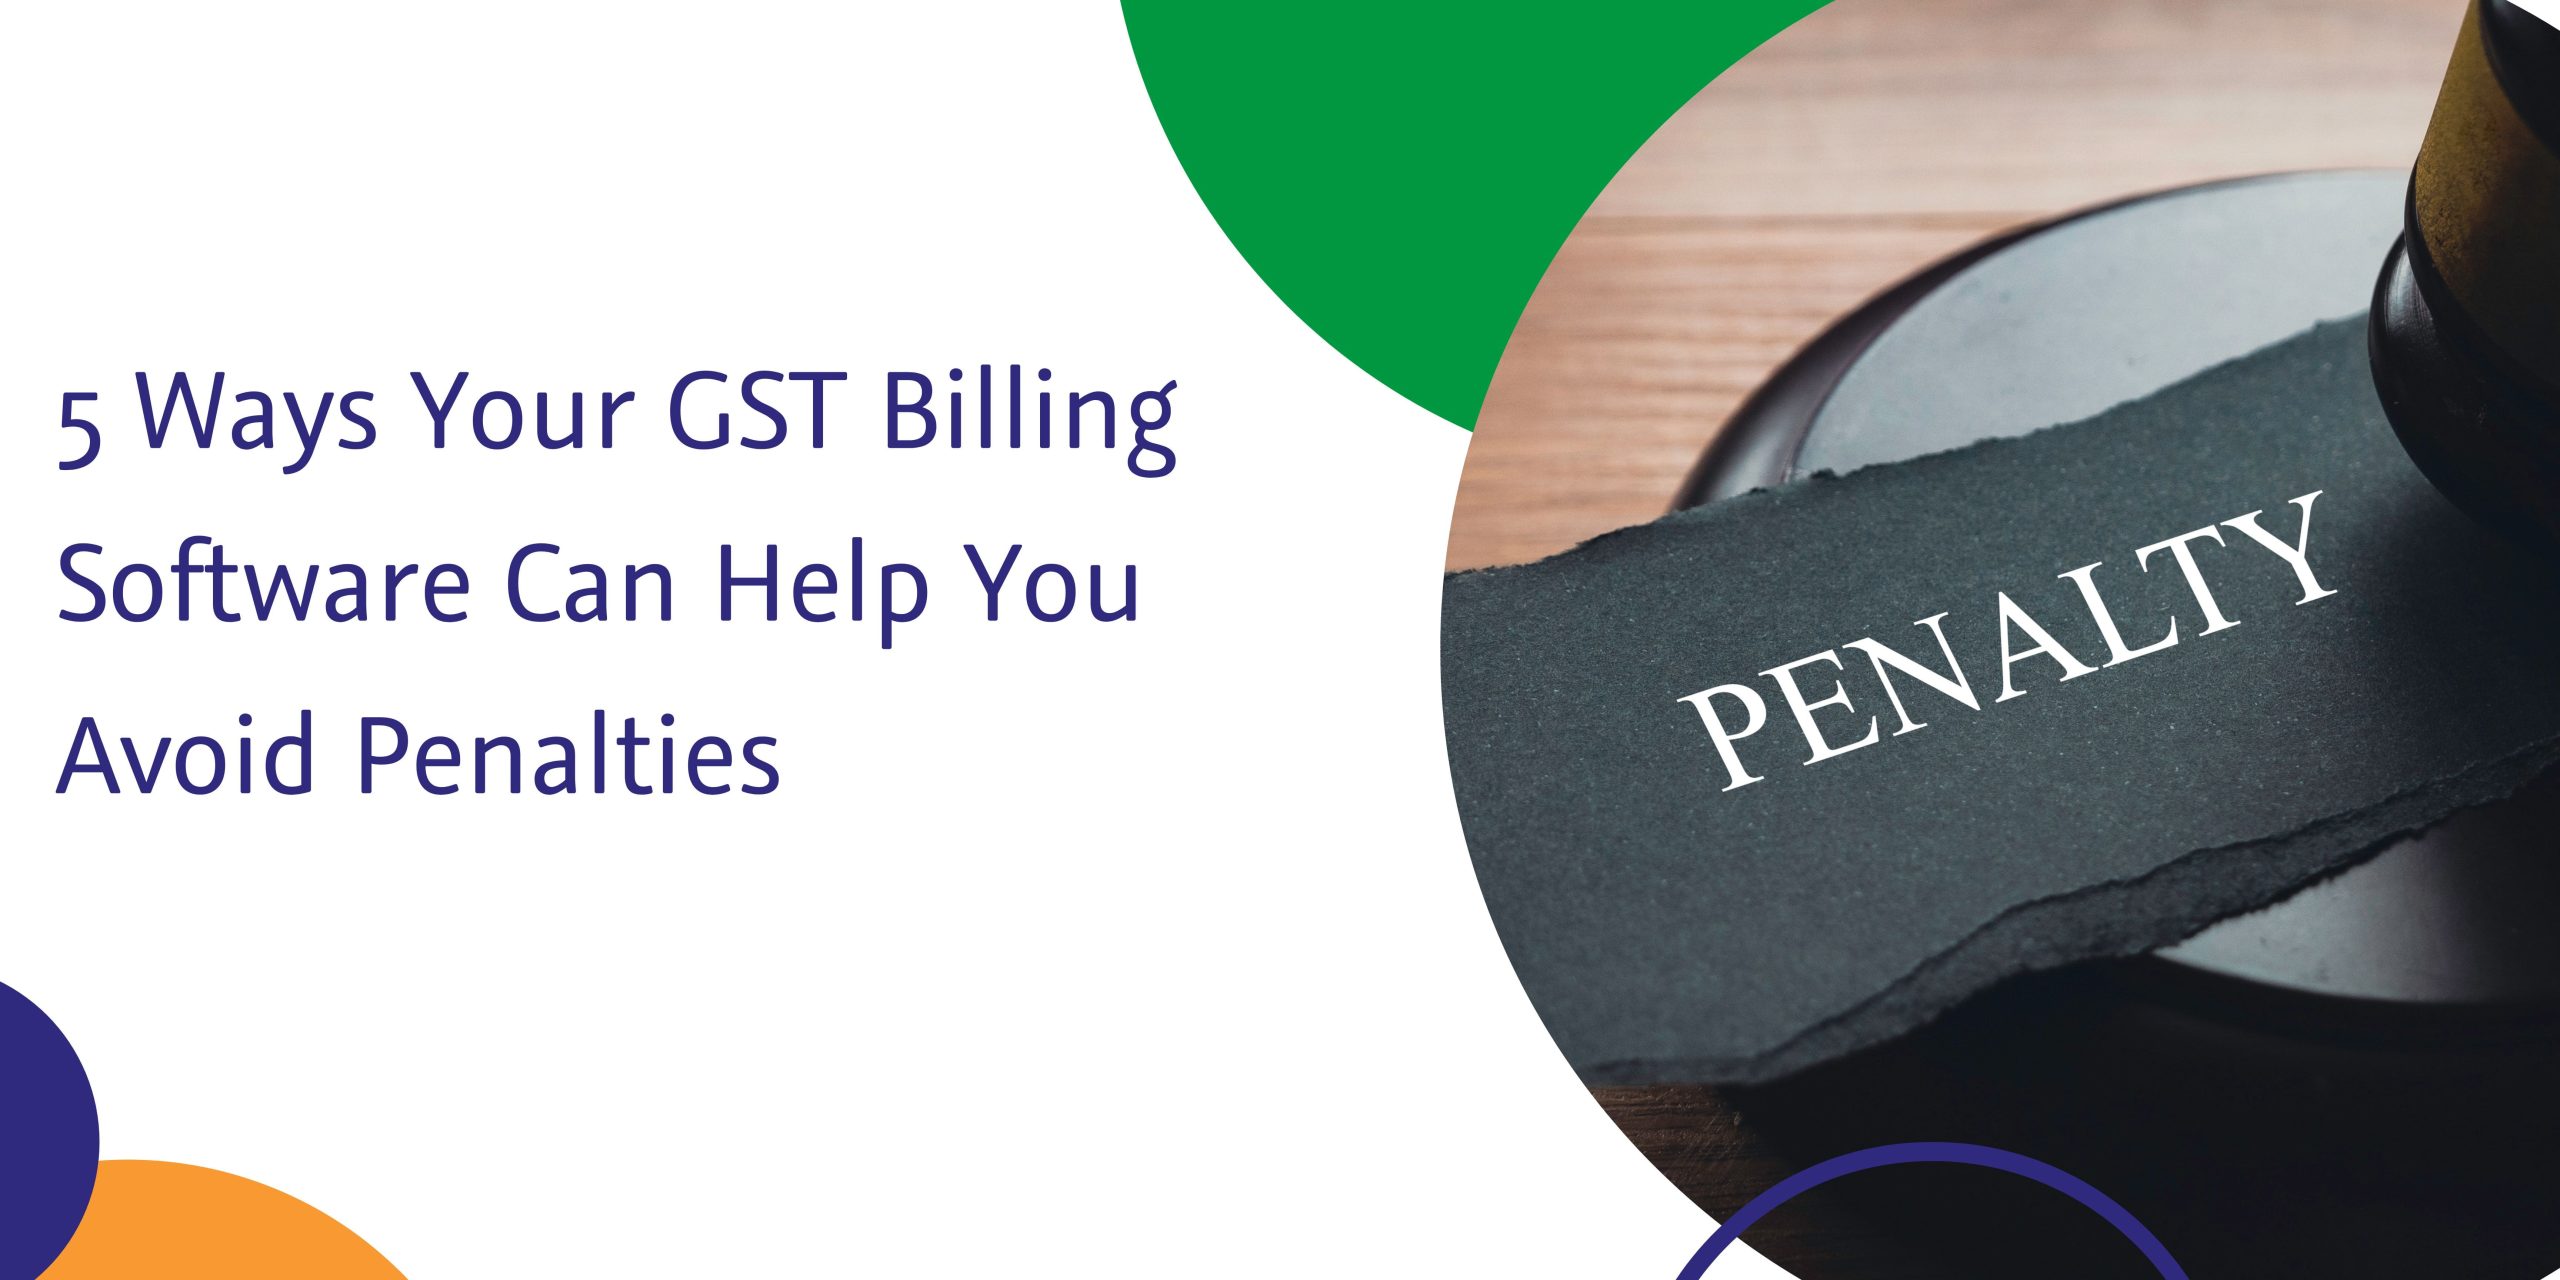 ways your gst billing software can help you avoid penalties